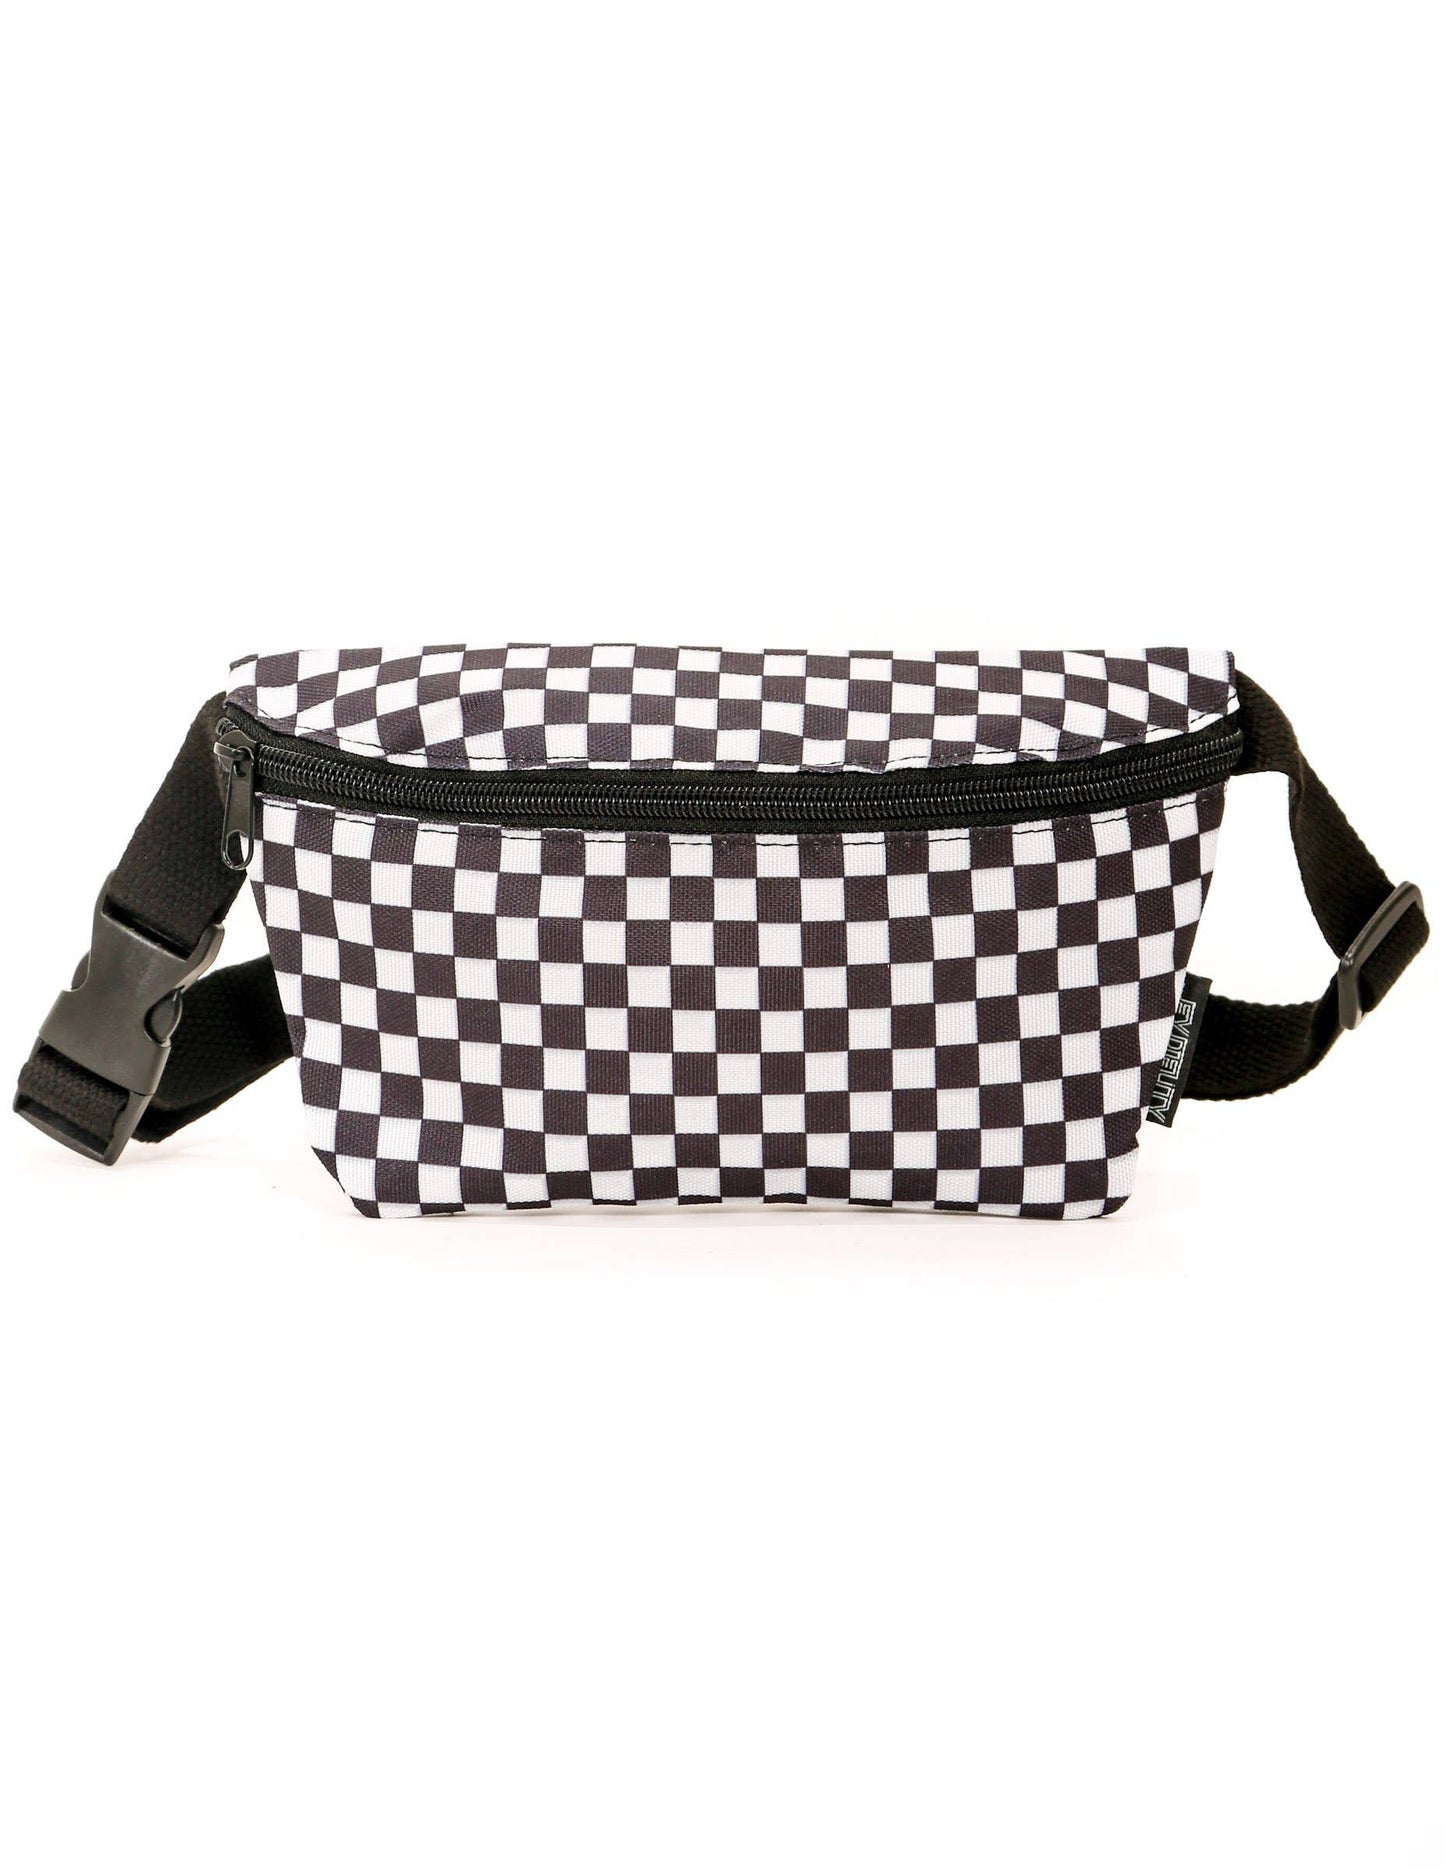 FANNY PACK-BLACK & WHITE CHECKERS